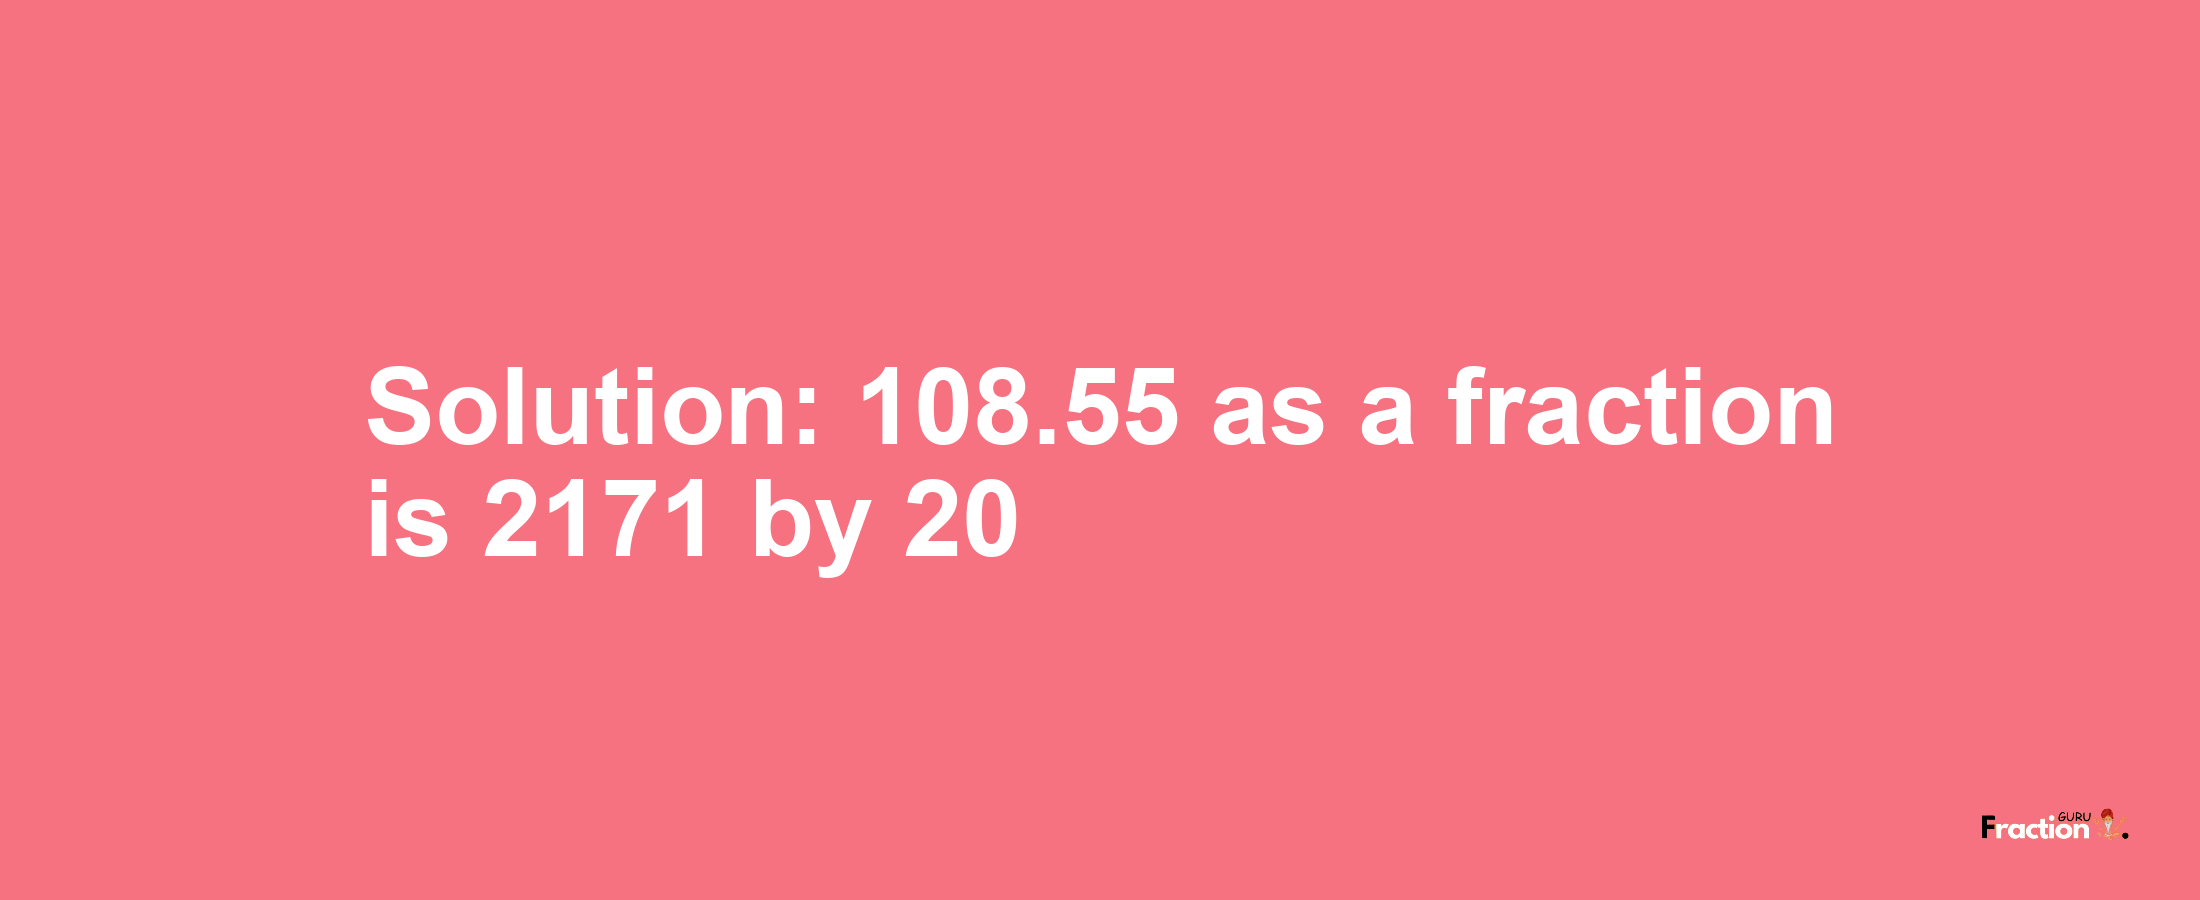 Solution:108.55 as a fraction is 2171/20